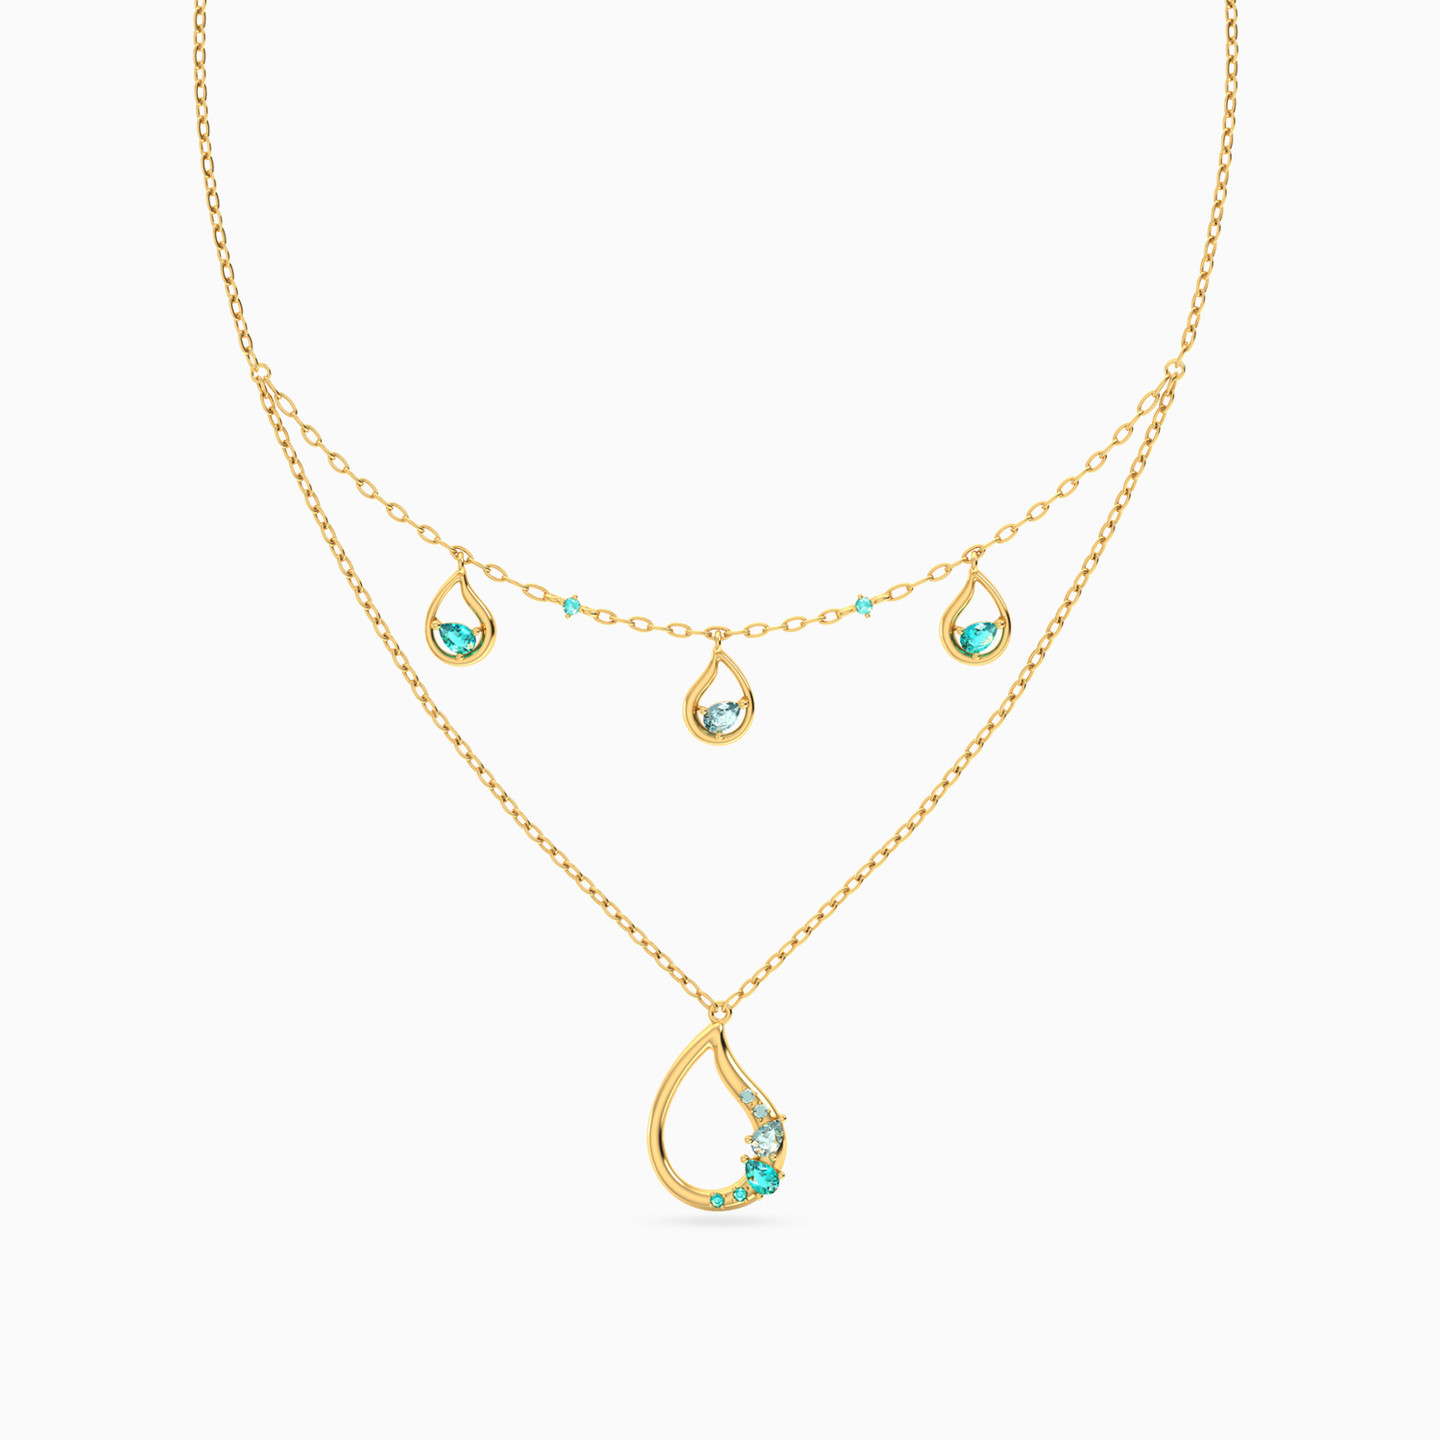 14K Gold Colored Stones Layered Necklace - 3